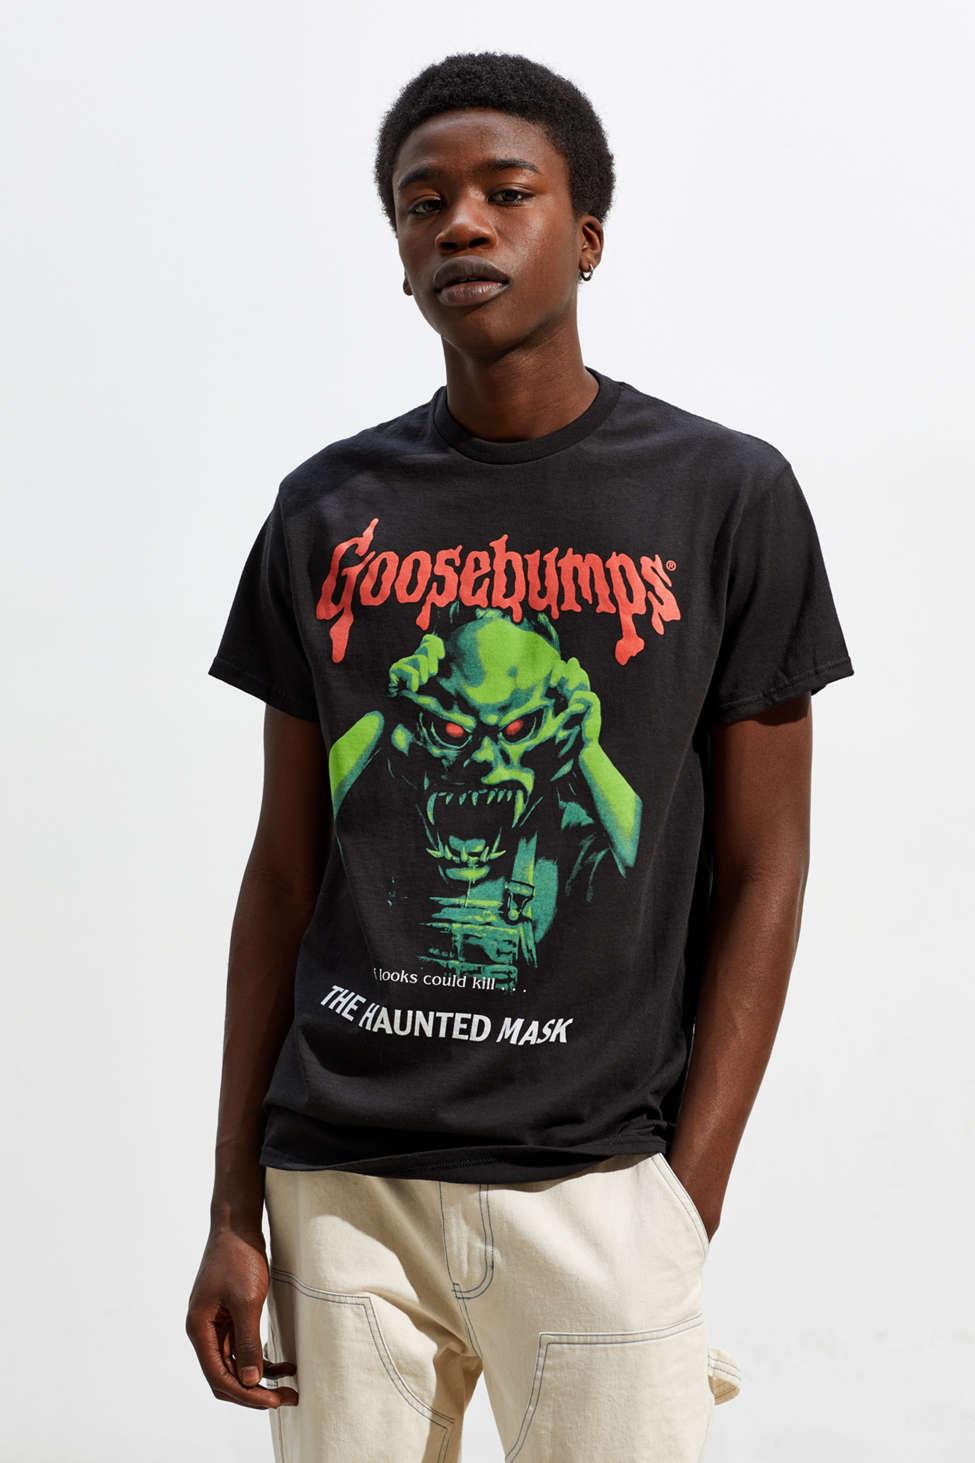 Urban Outfitters Cotton Goosebumps Haunted Mask Tee in Black for Men - Lyst